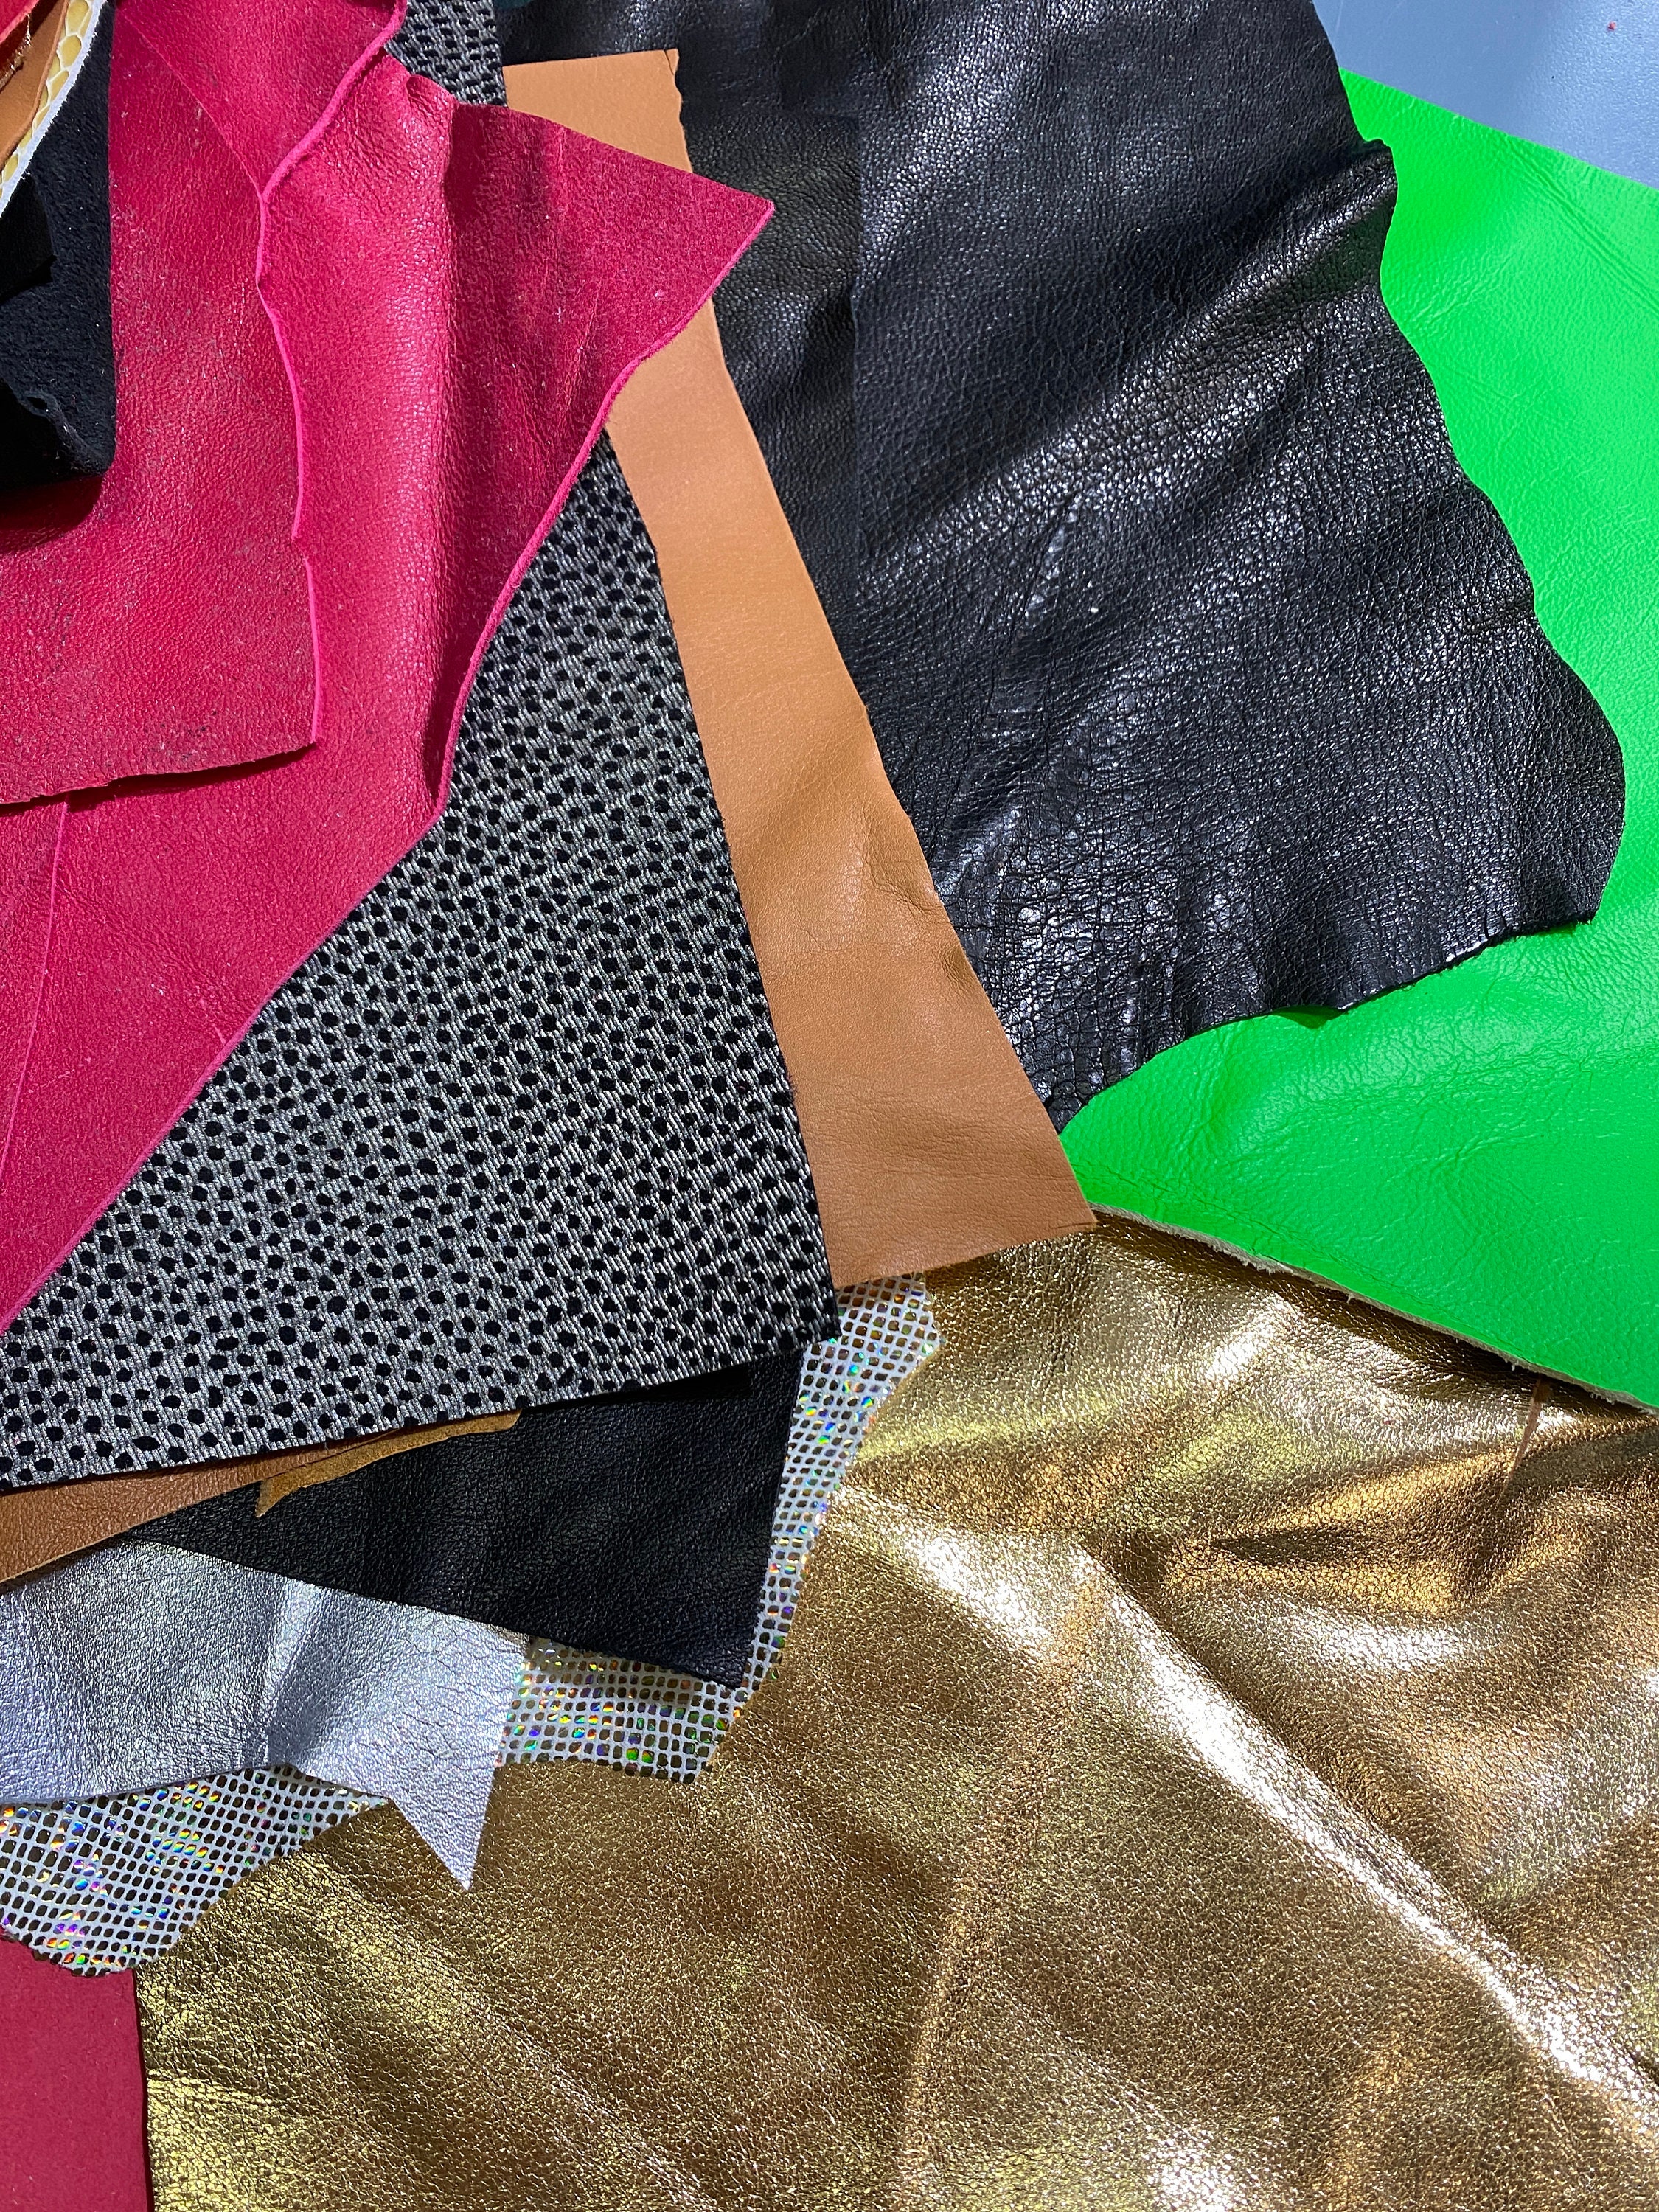 Upholstery Leather Scraps for small crafts 1 - 2 Hands